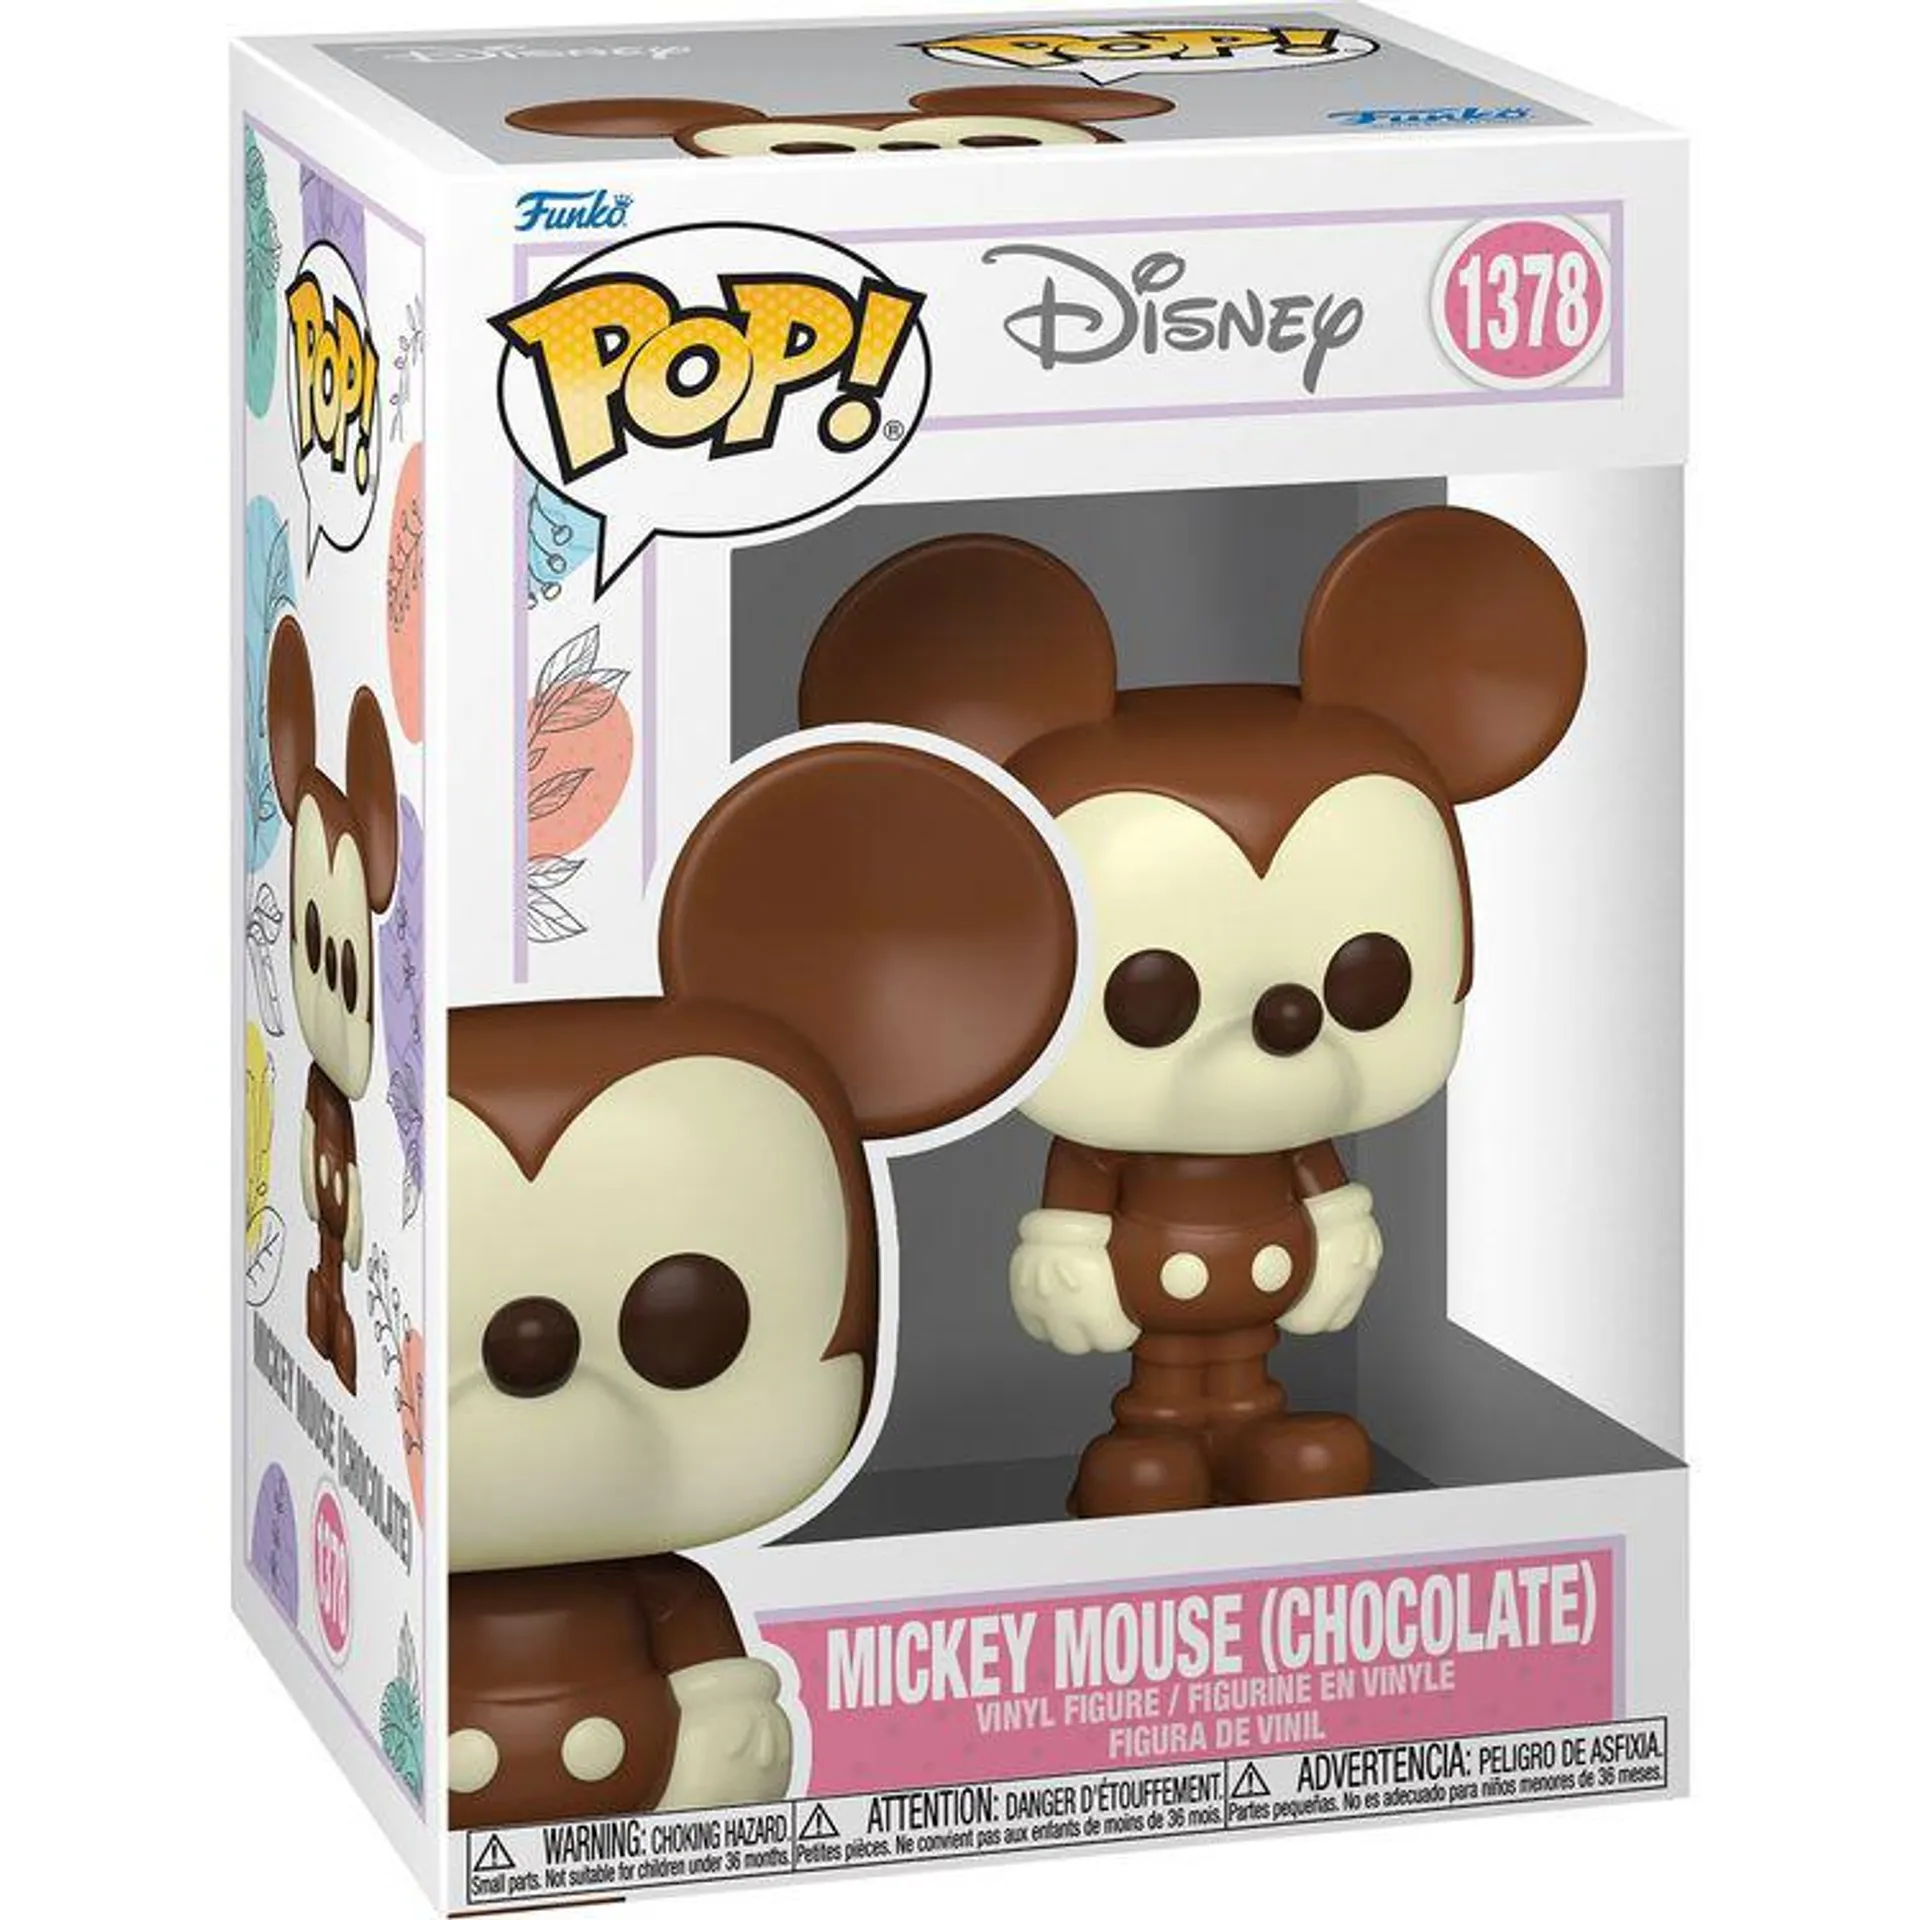 Disney Mickey Mouse (Easter Chocolate) Pop! Figure